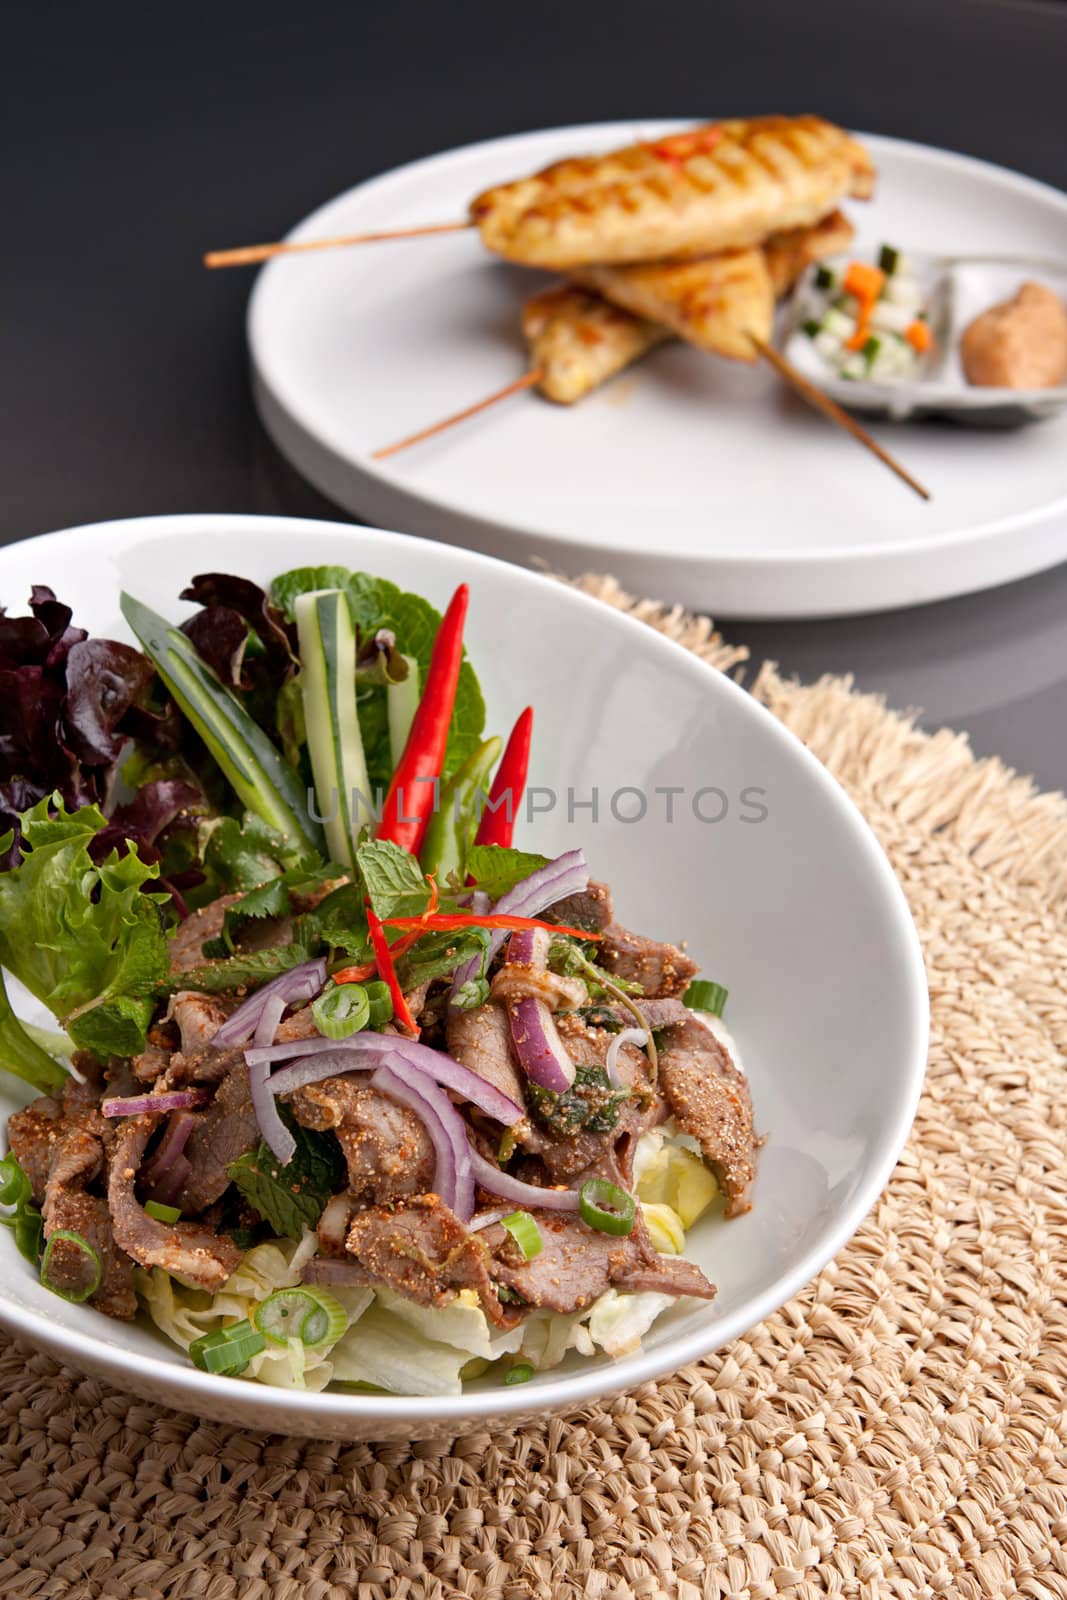 Asian style Thai salad with steak and chicken satay barbecued chicken on skewers appetizers in the background.